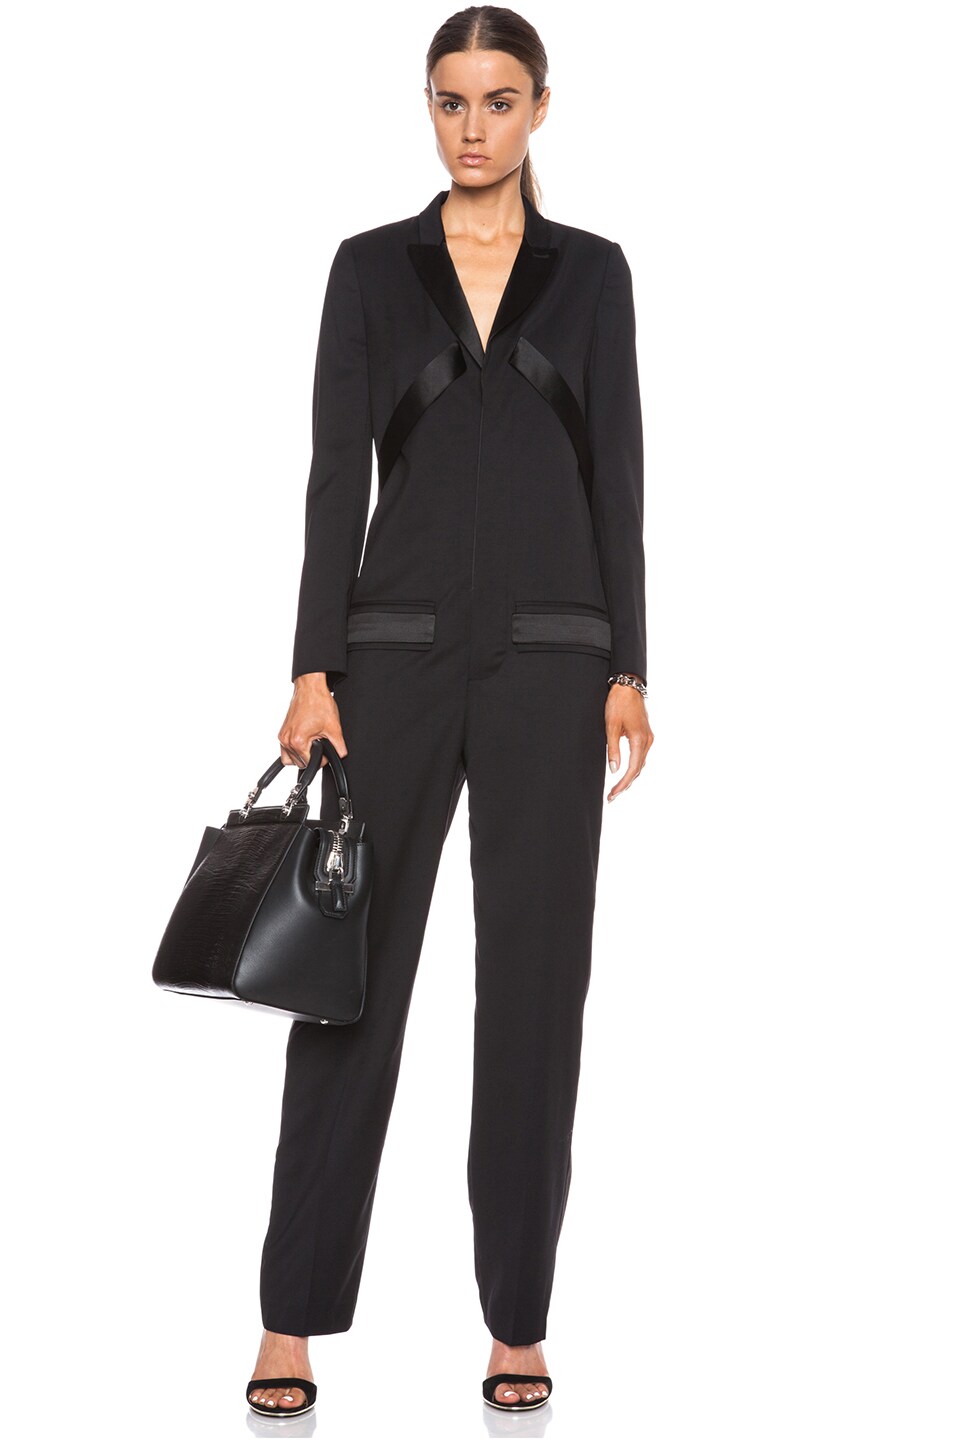 Givenchy Light Wool Jumpsuit with Satin Lapel in Black | FWRD